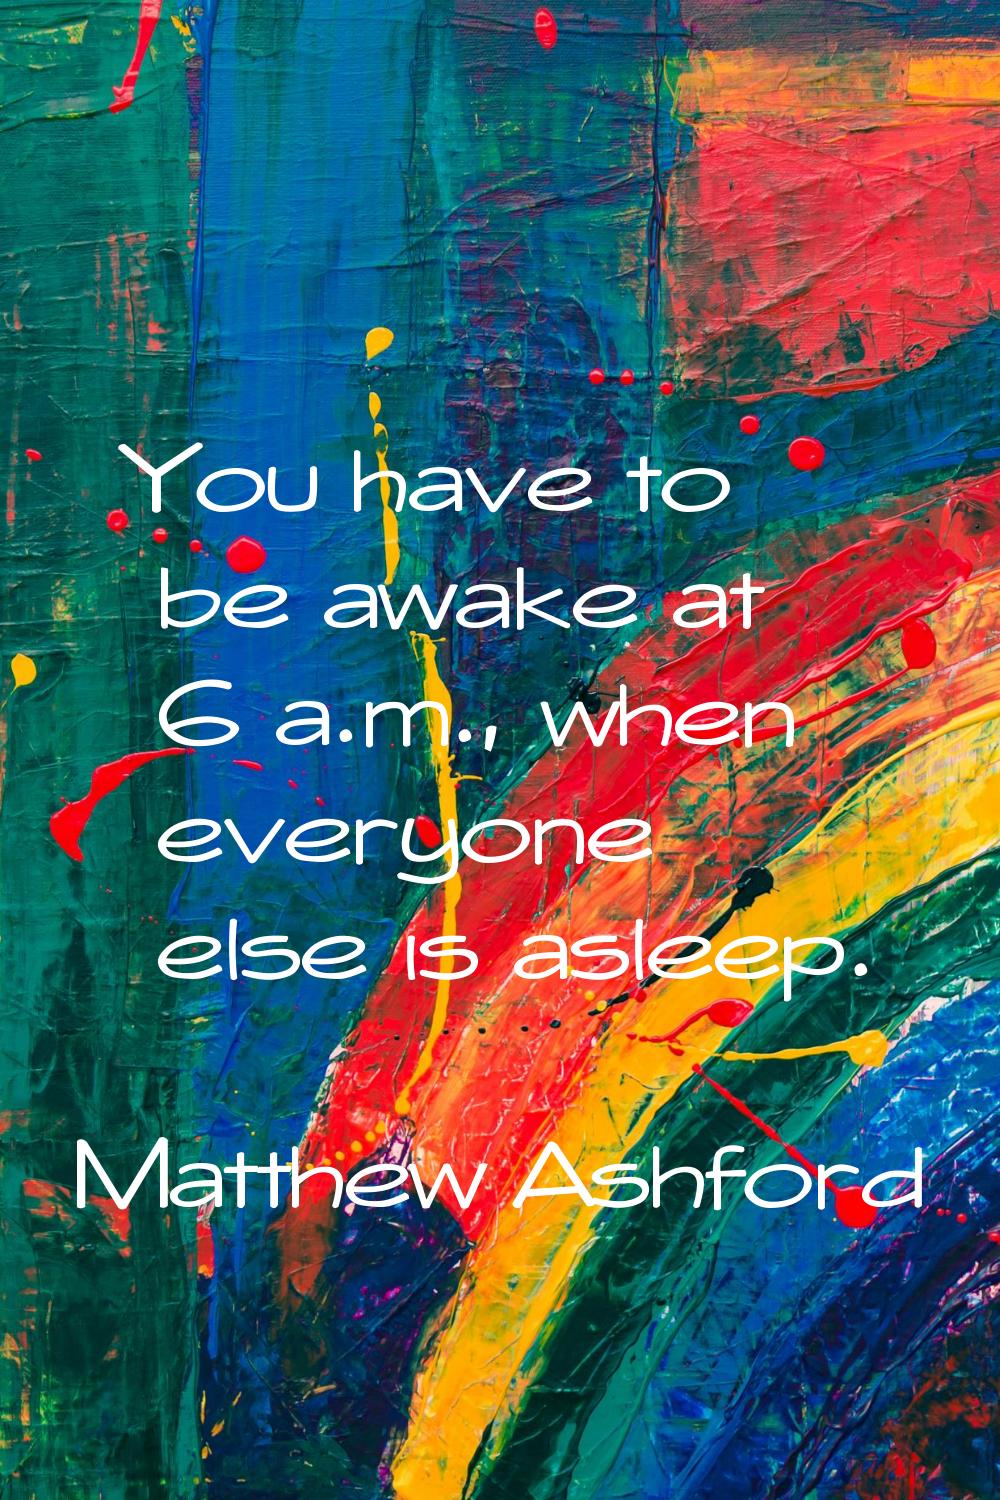 You have to be awake at 6 a.m., when everyone else is asleep.